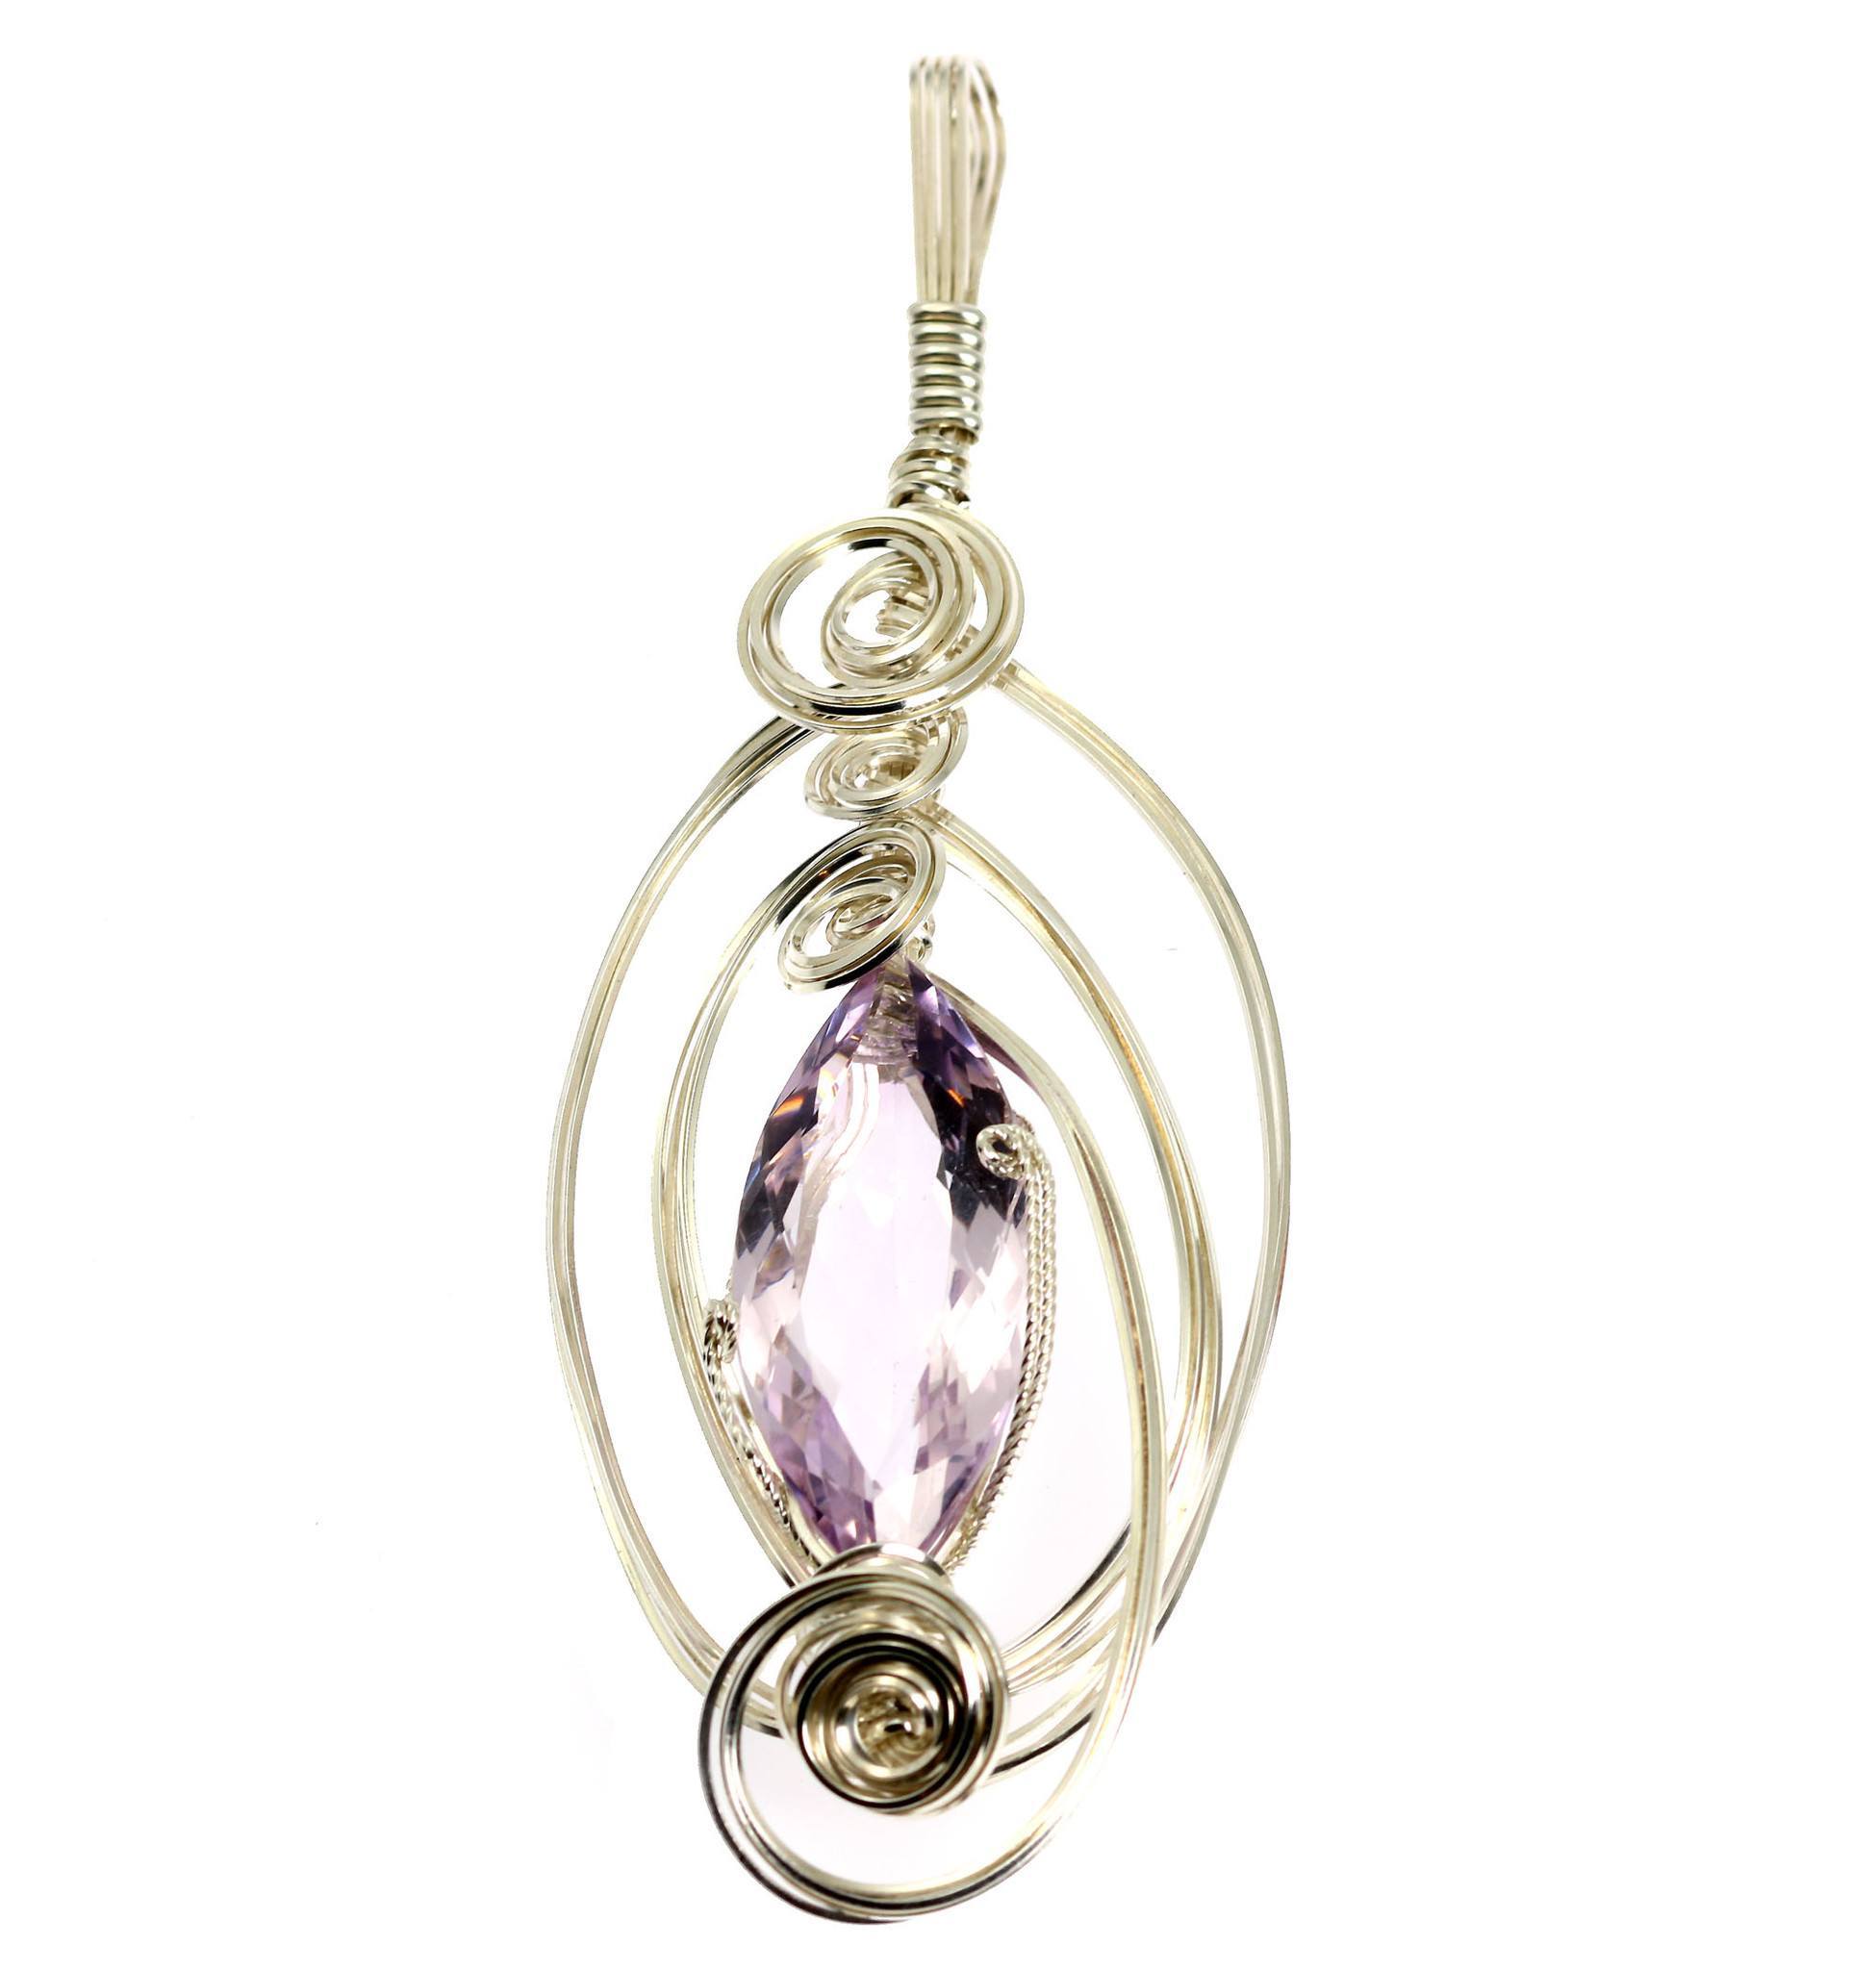 32.5 CT Marquise Cut Amethyst Sterling Silver Pendant